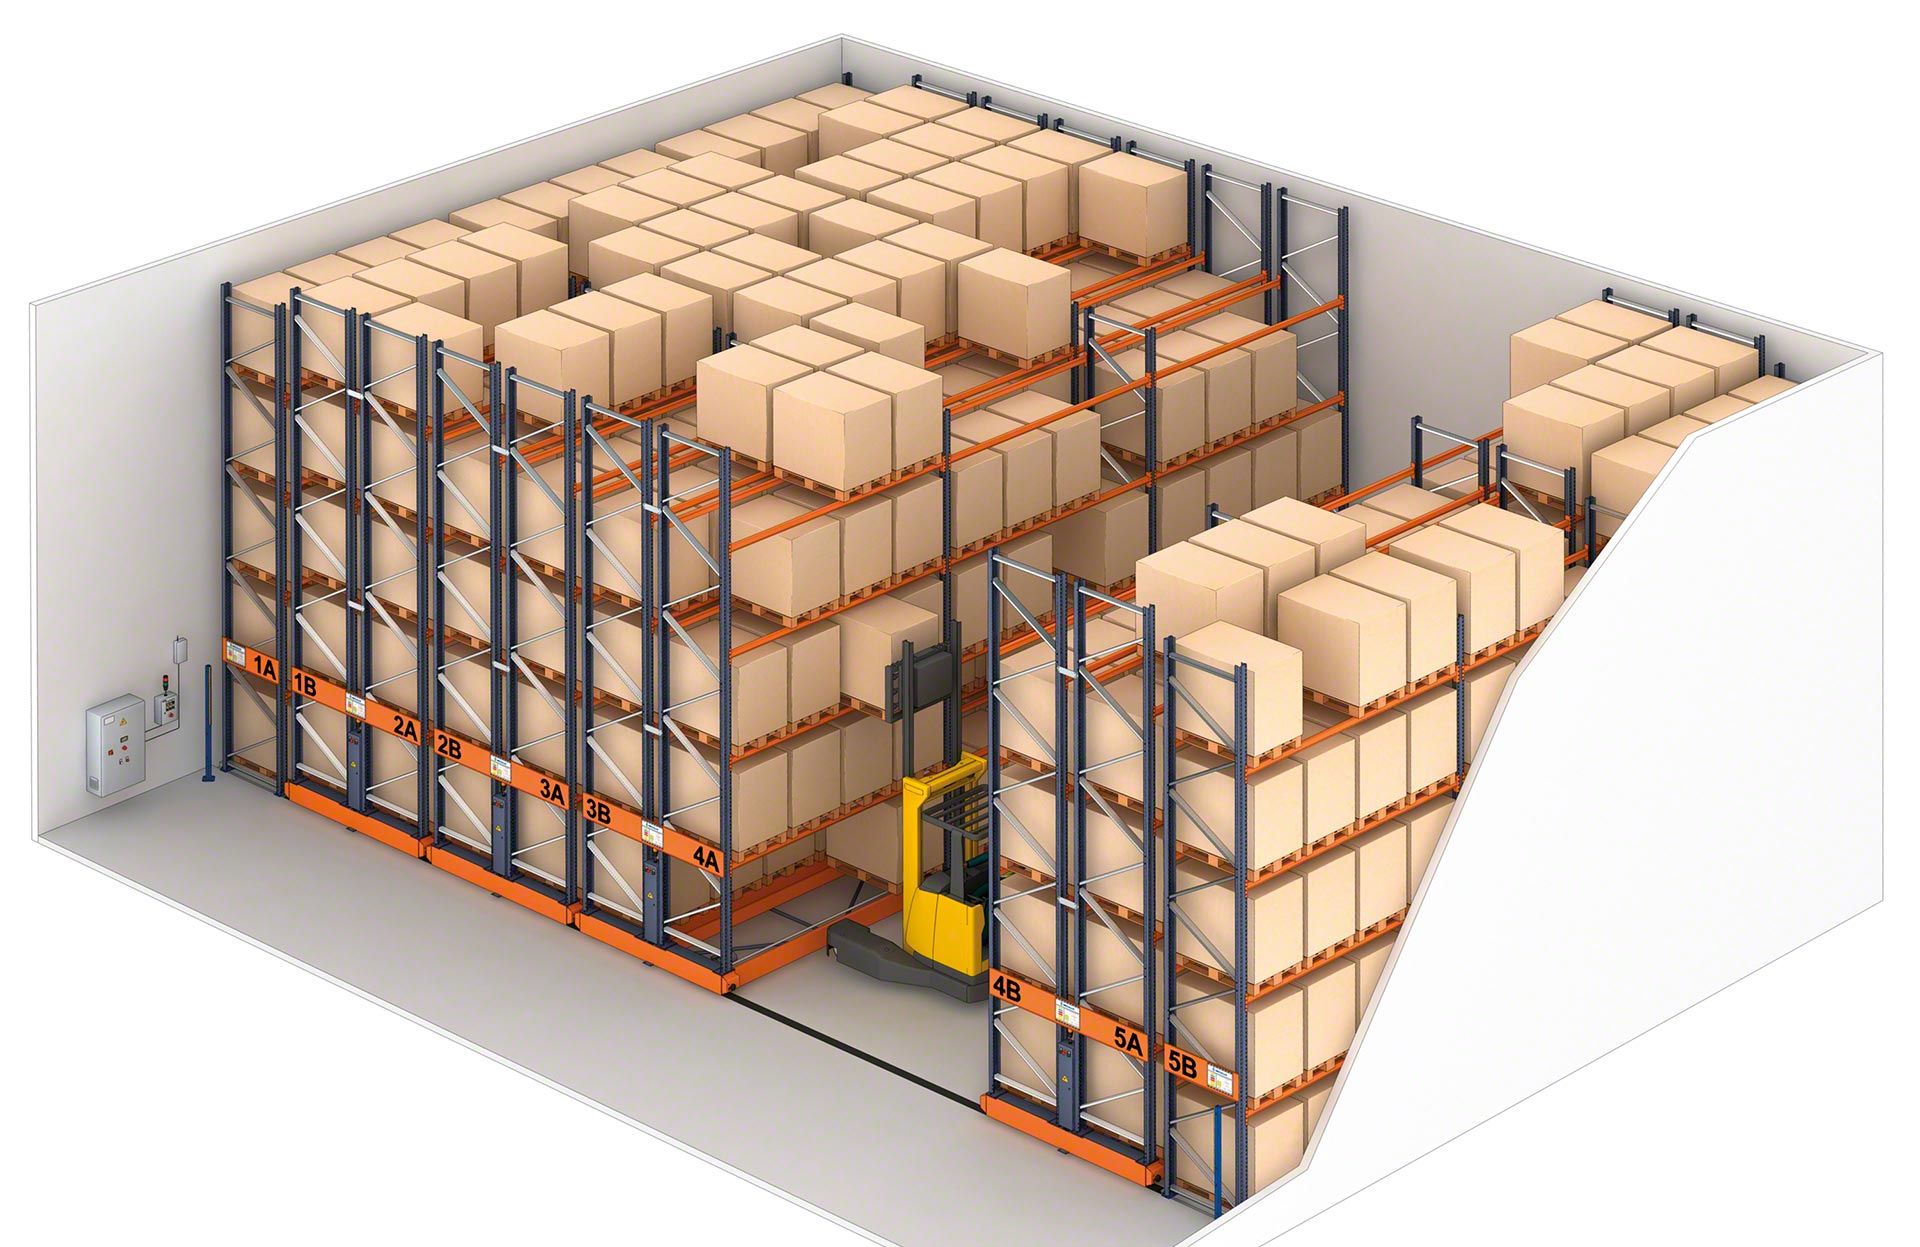 Mobile racking offers the utmost high-density storage for increased warehouse capacity